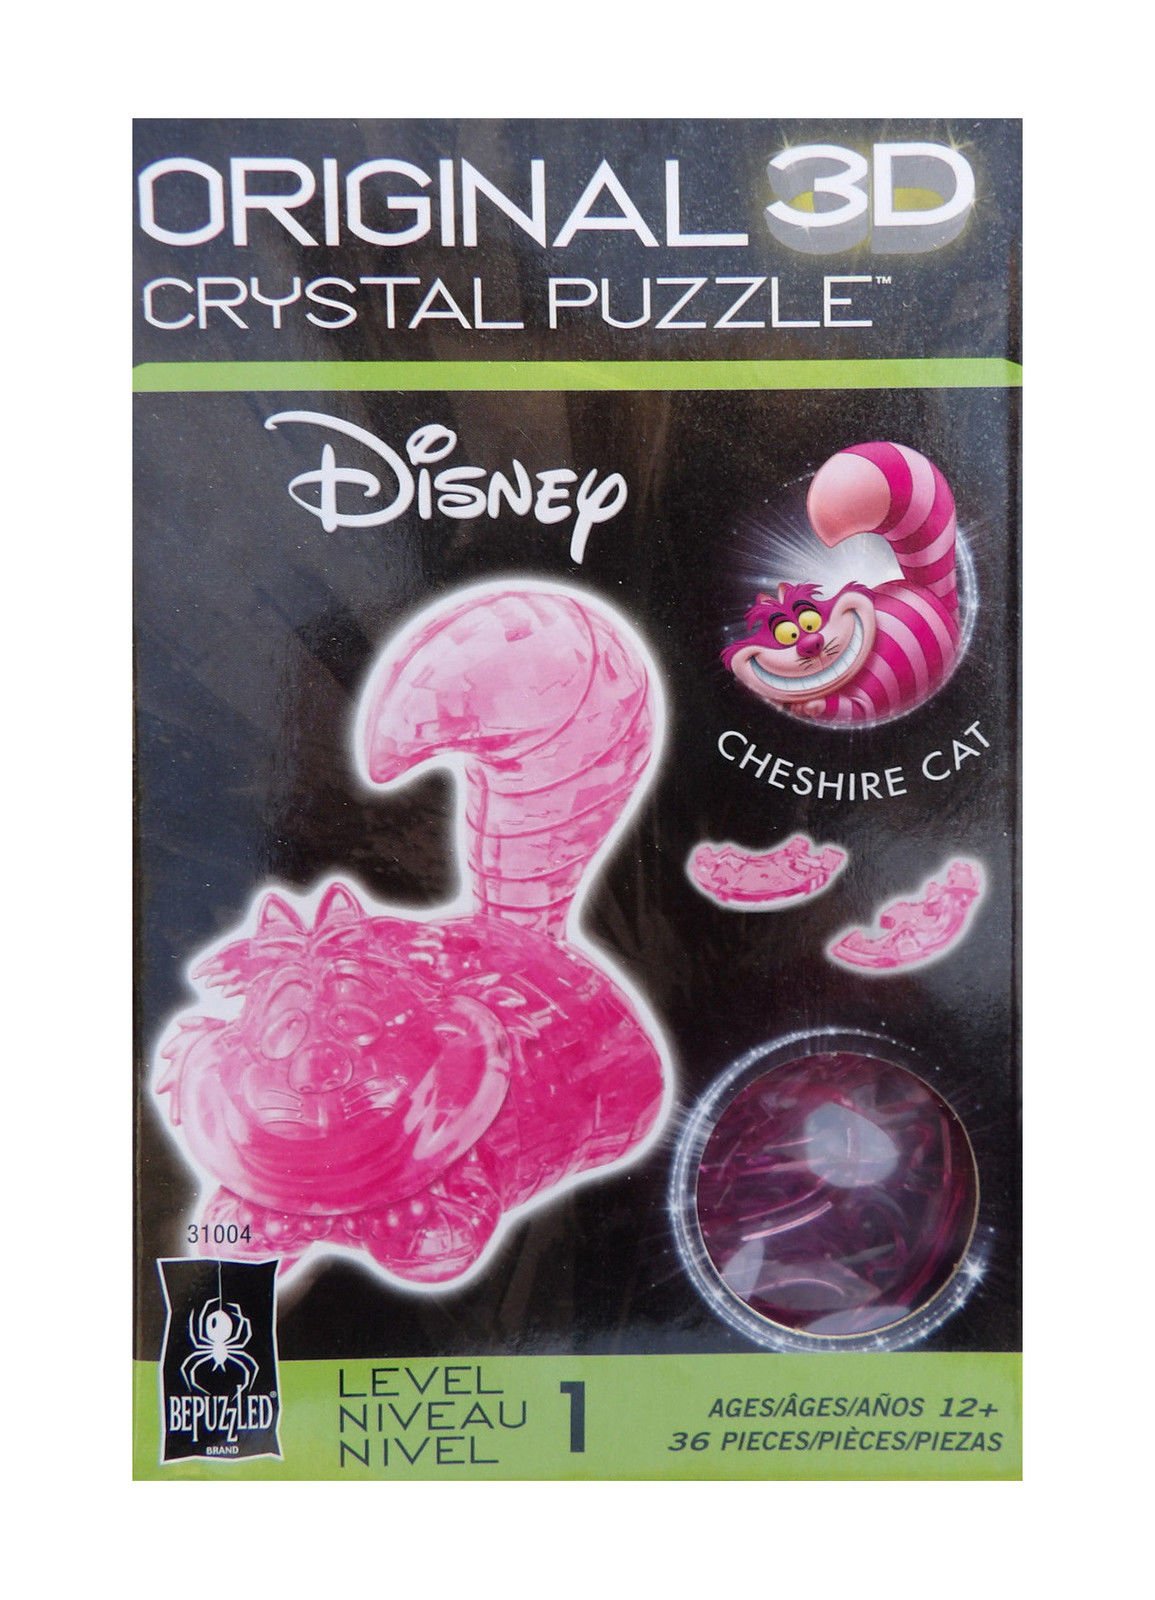 DISNEY 3D Crystal Puzzle Cheshire Cat 36 Piece from